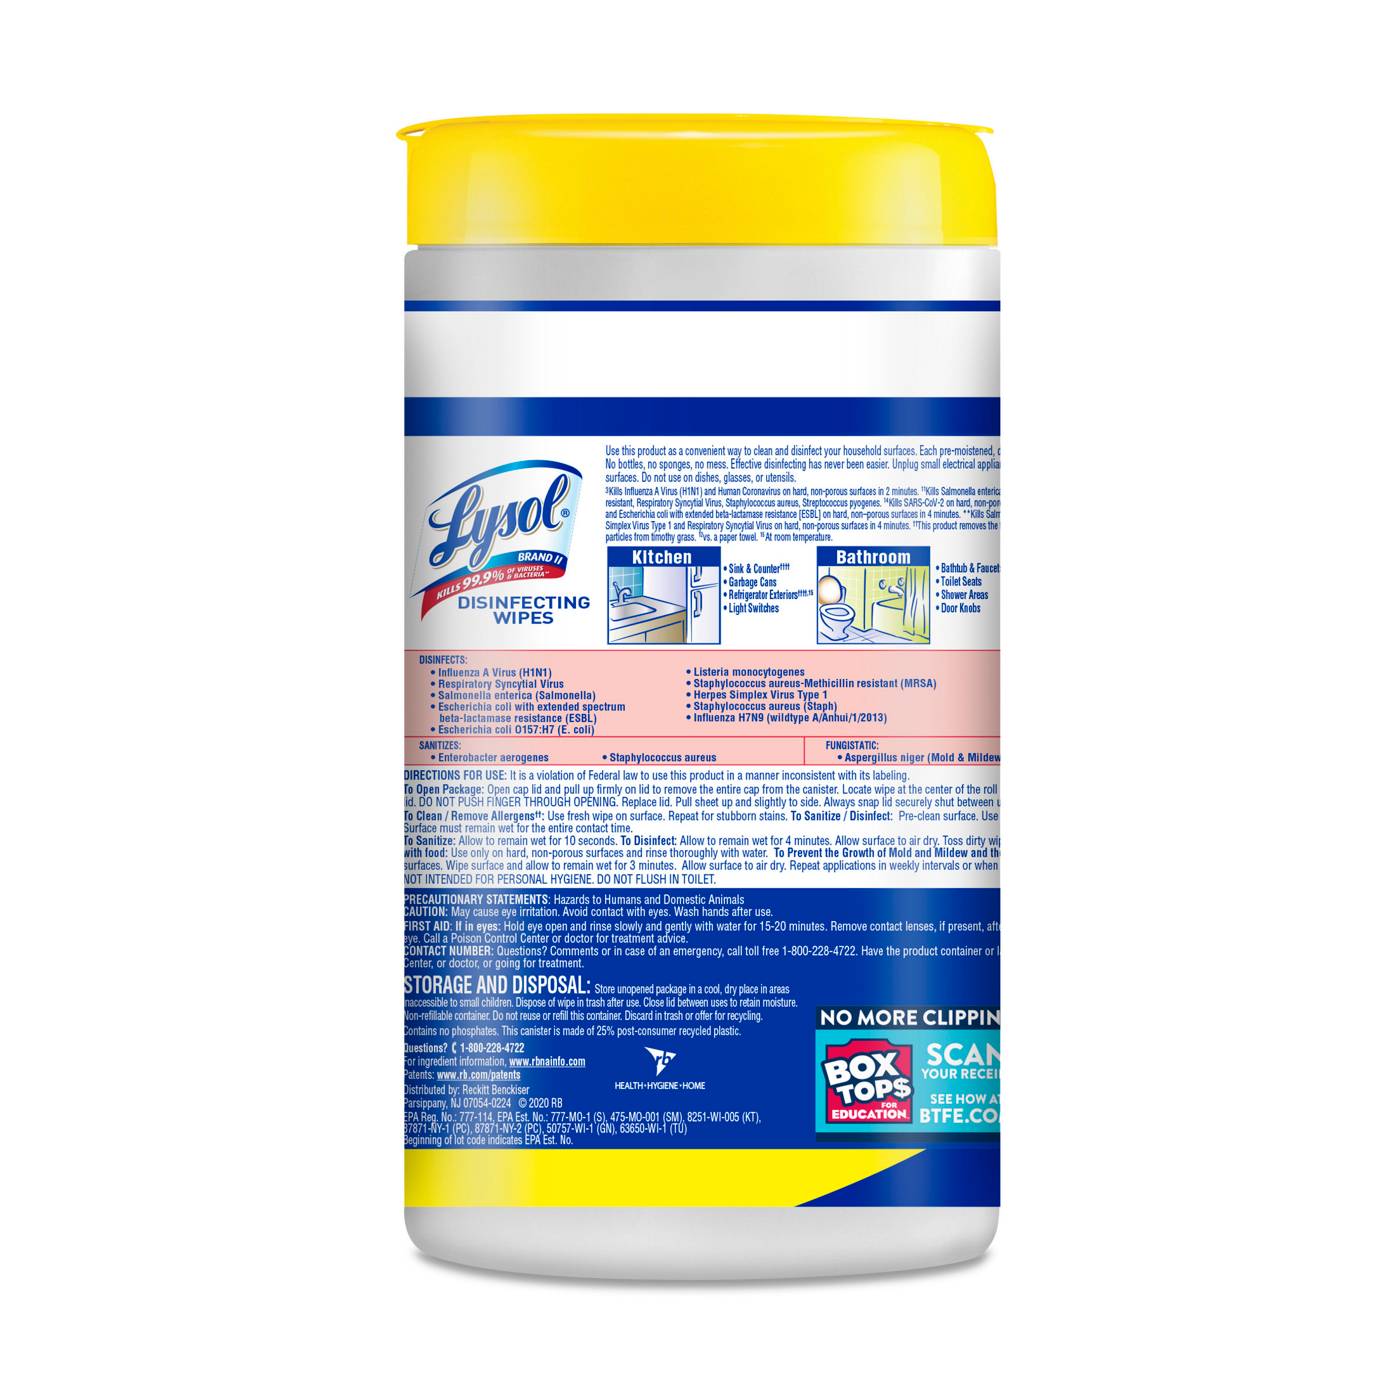 Lysol Lemon & Lime Blossom Disinfecting Wipes; image 4 of 6